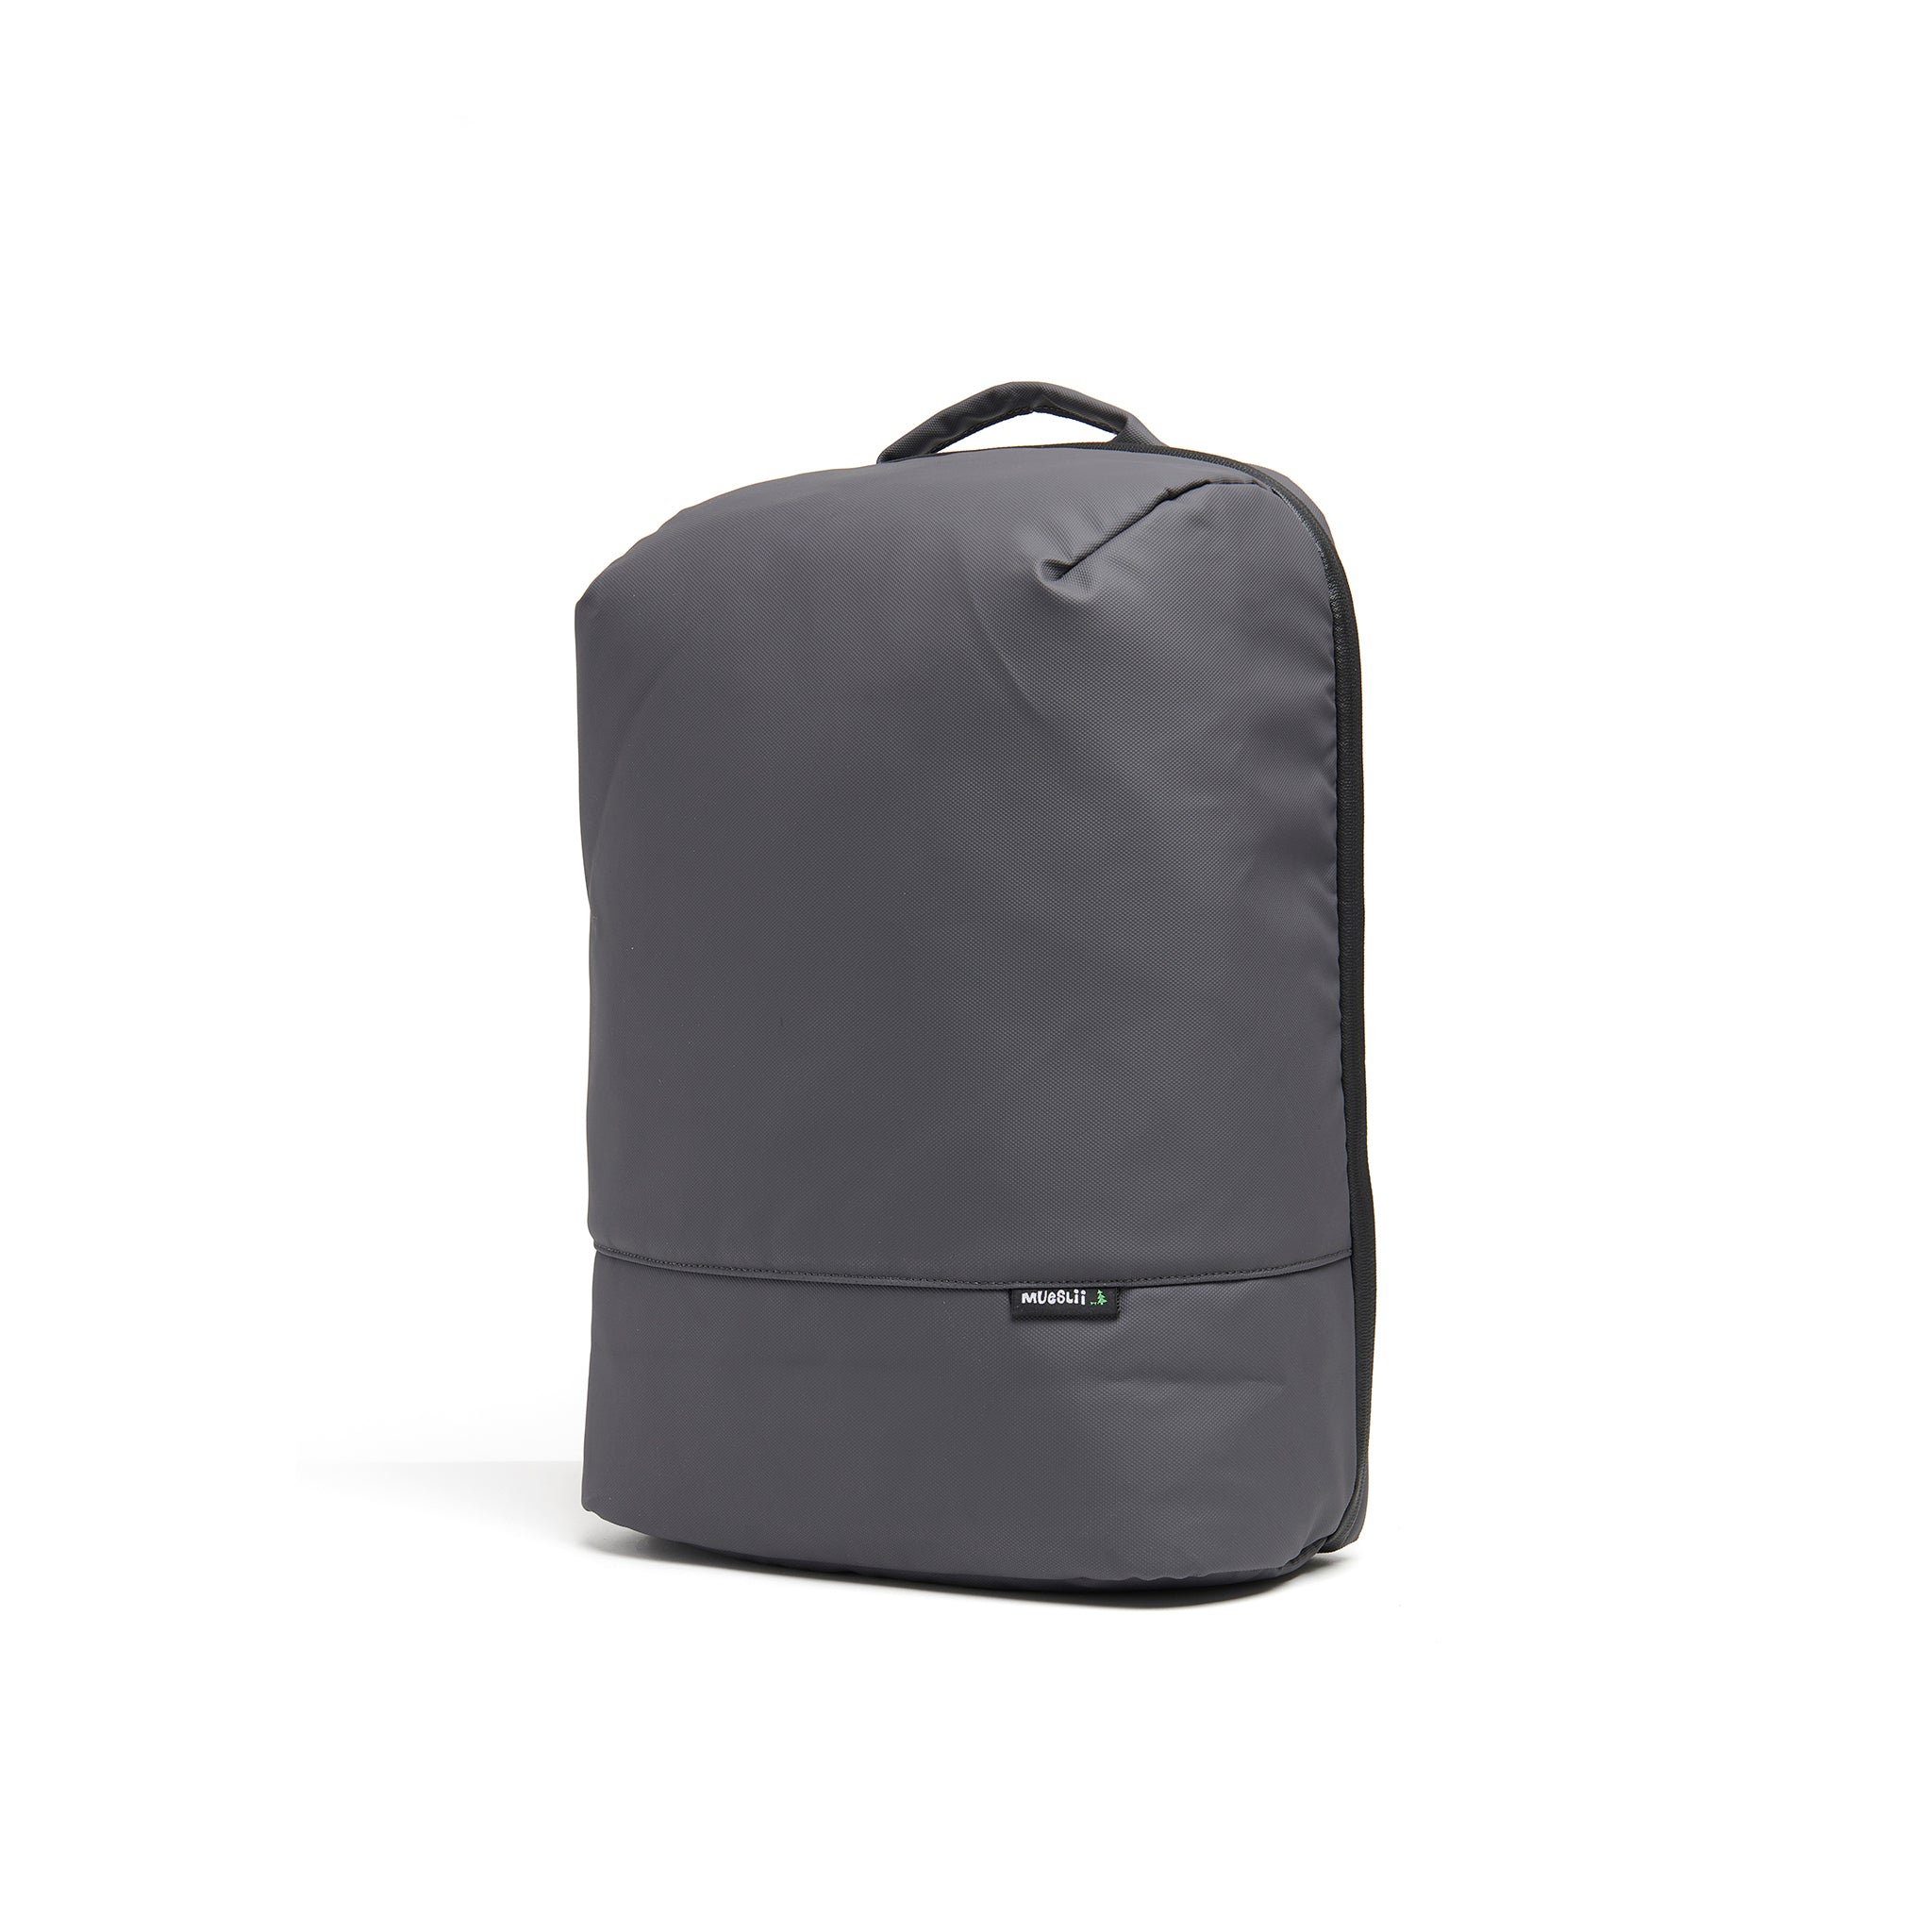 Mueslii travel backpack, made of PU coated waterproof nylon, with a laptop compartment, color grey, side view.